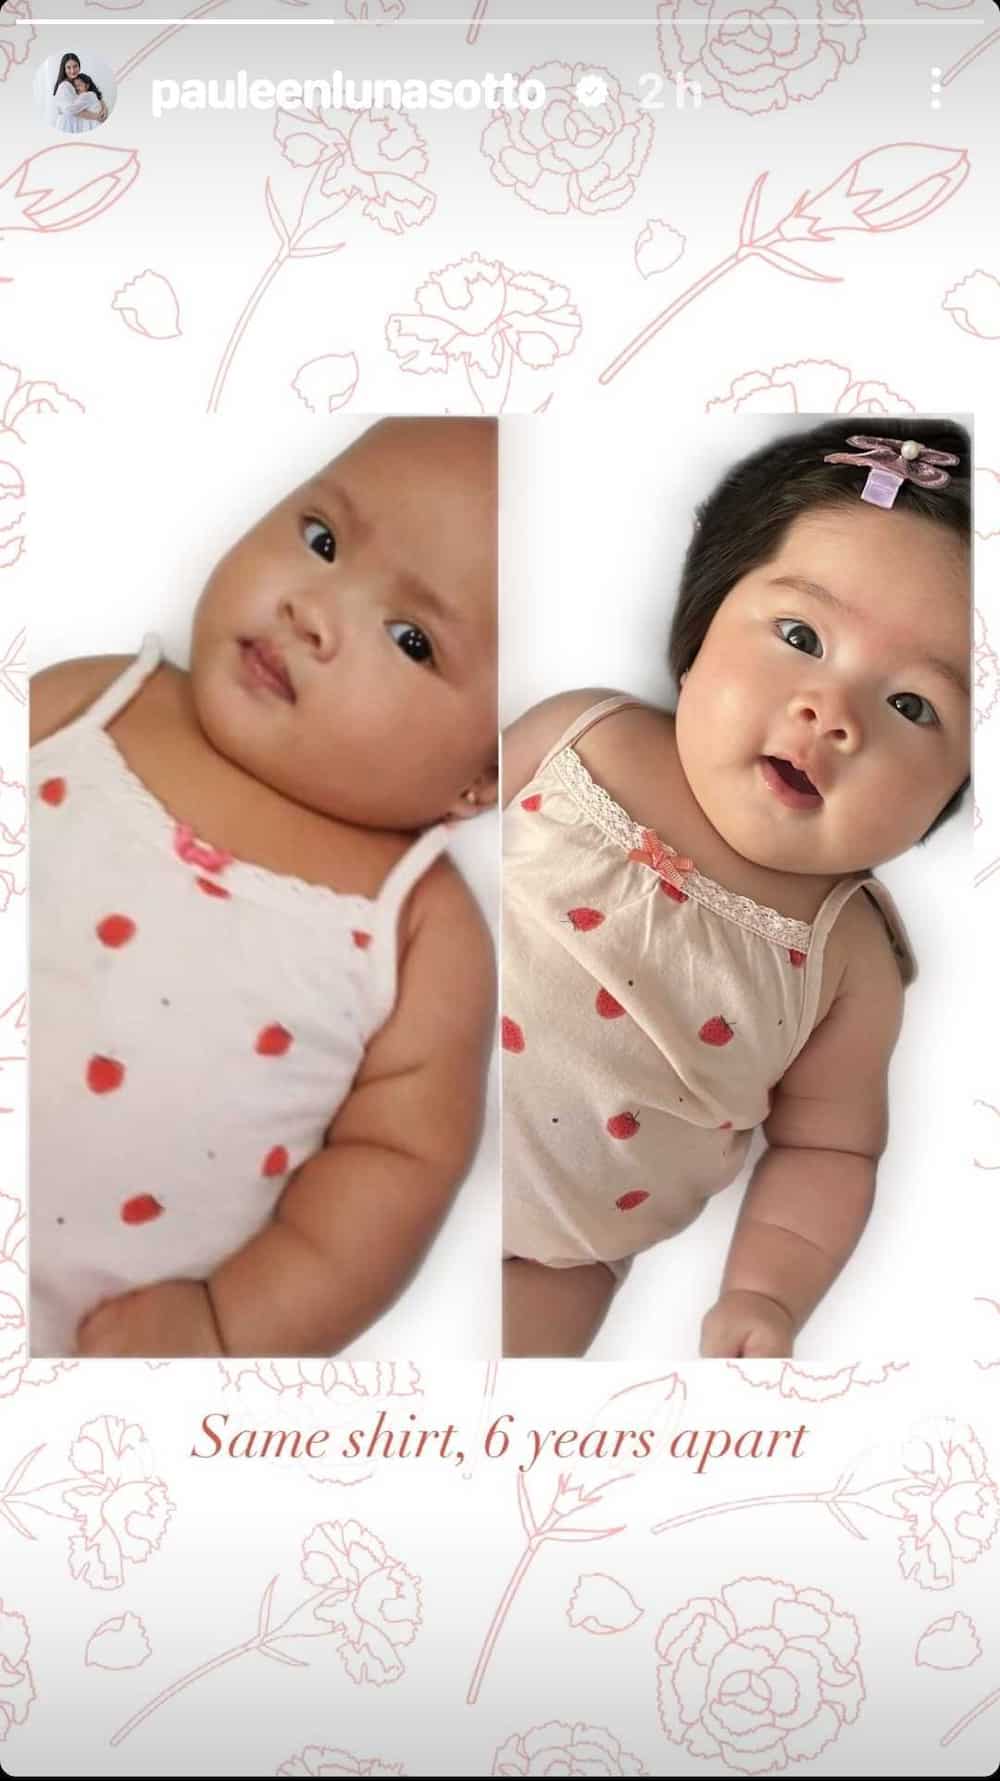 Pauleen Luna shares adorable snaps of Tali, Baby Mochi with same attire: “6 years apart”